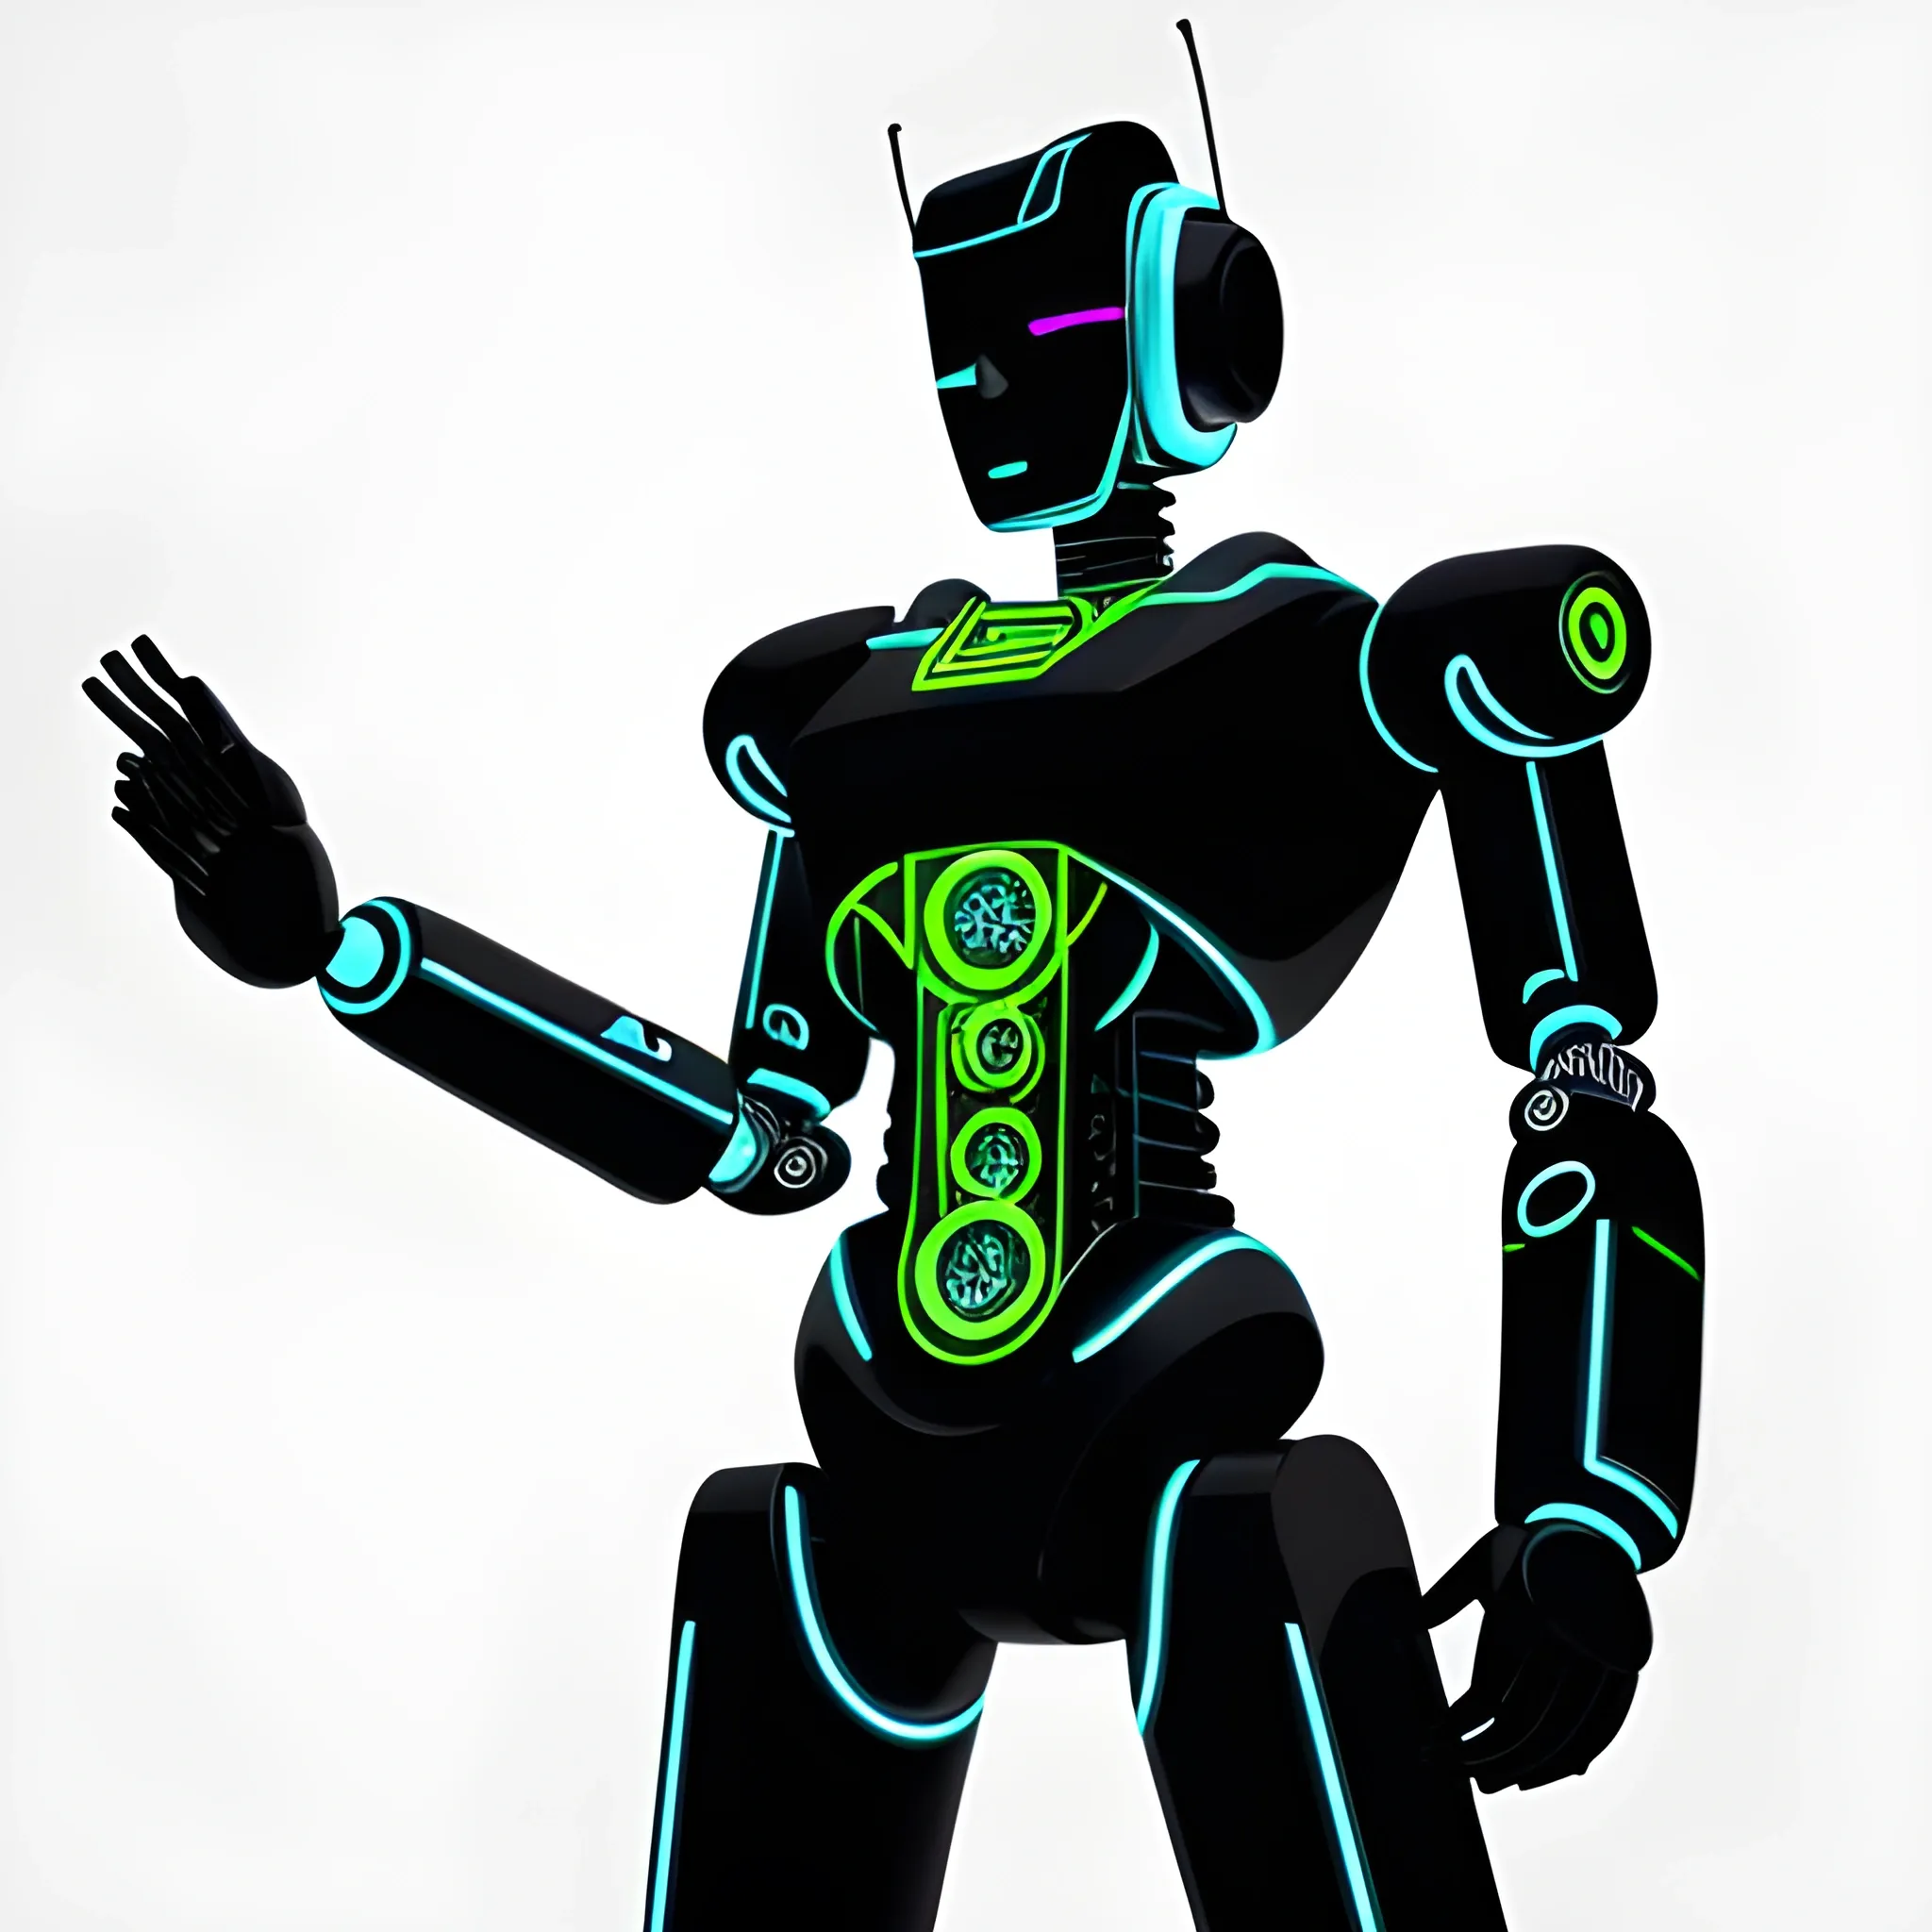 a model of a neon robot with black outlines stands on a white background